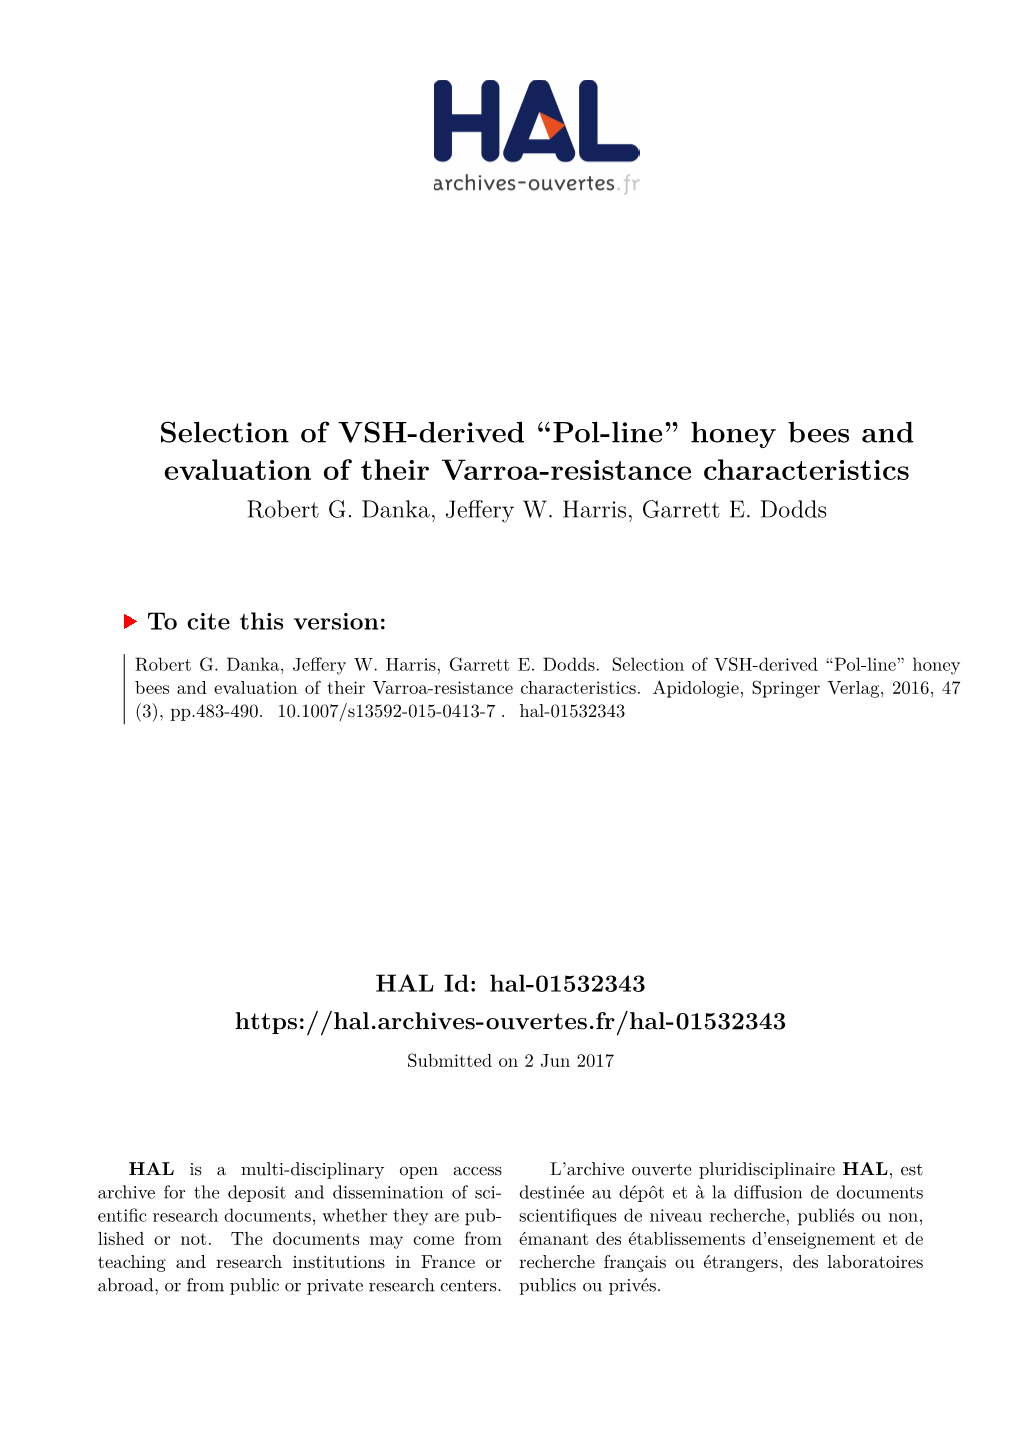 Pol-Line” Honey Bees and Evaluation of Their Varroa-Resistance Characteristics Robert G